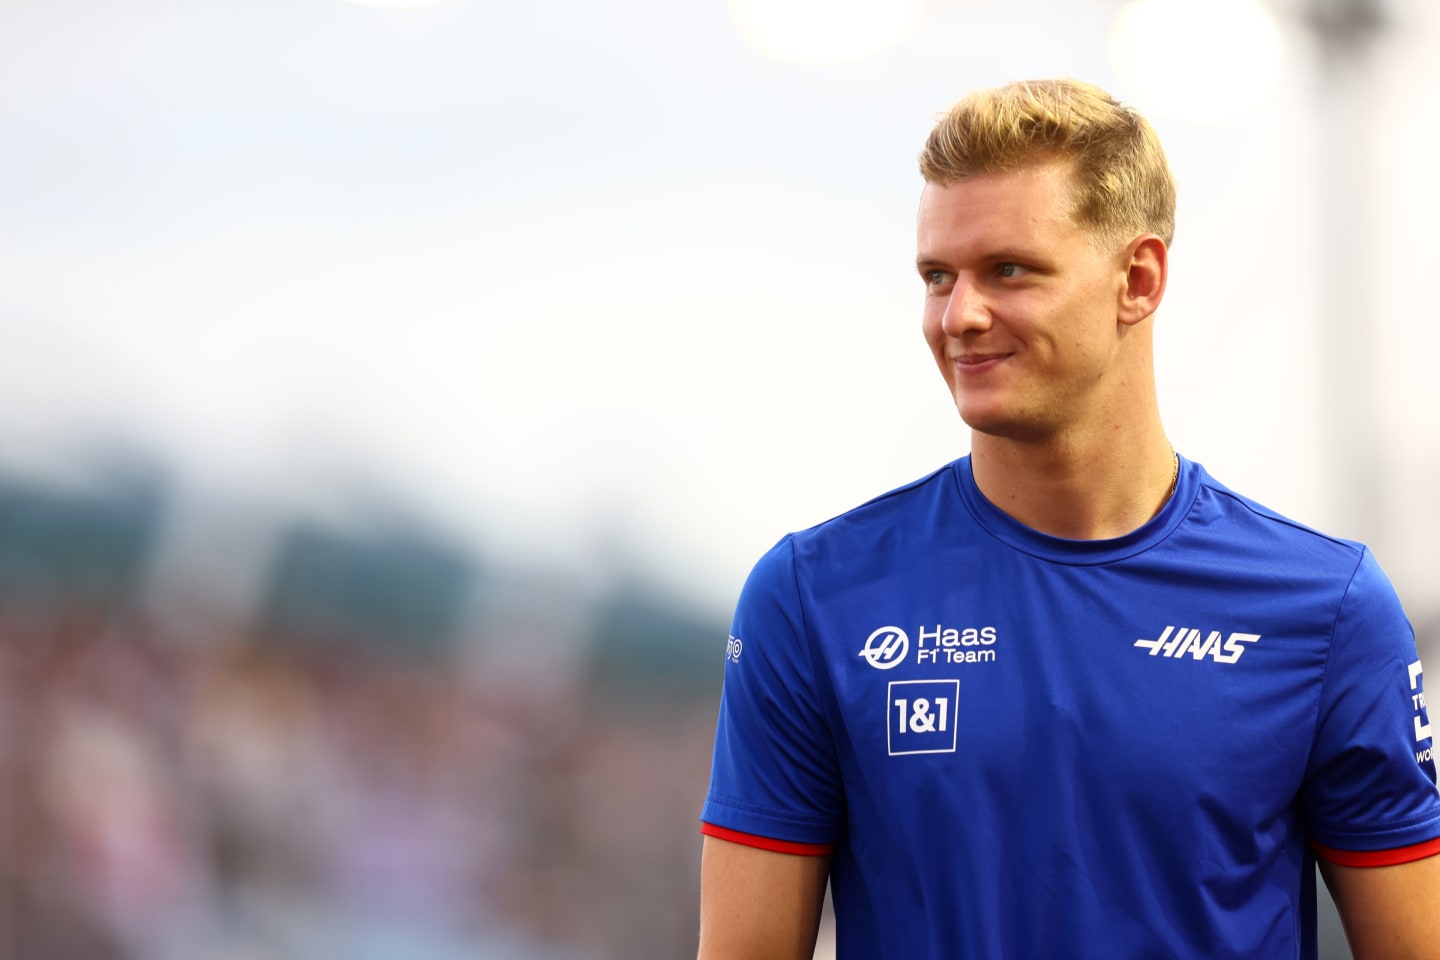 SINGAPORE, SINGAPORE - OCTOBER 02: Mick Schumacher of Germany and Haas F1 looks on from the drivers parade prior to the F1 Grand Prix of Singapore at Marina Bay Street Circuit on October 02, 2022 in Singapore, Singapore. (Photo by Mark Thompson/Getty Images,)